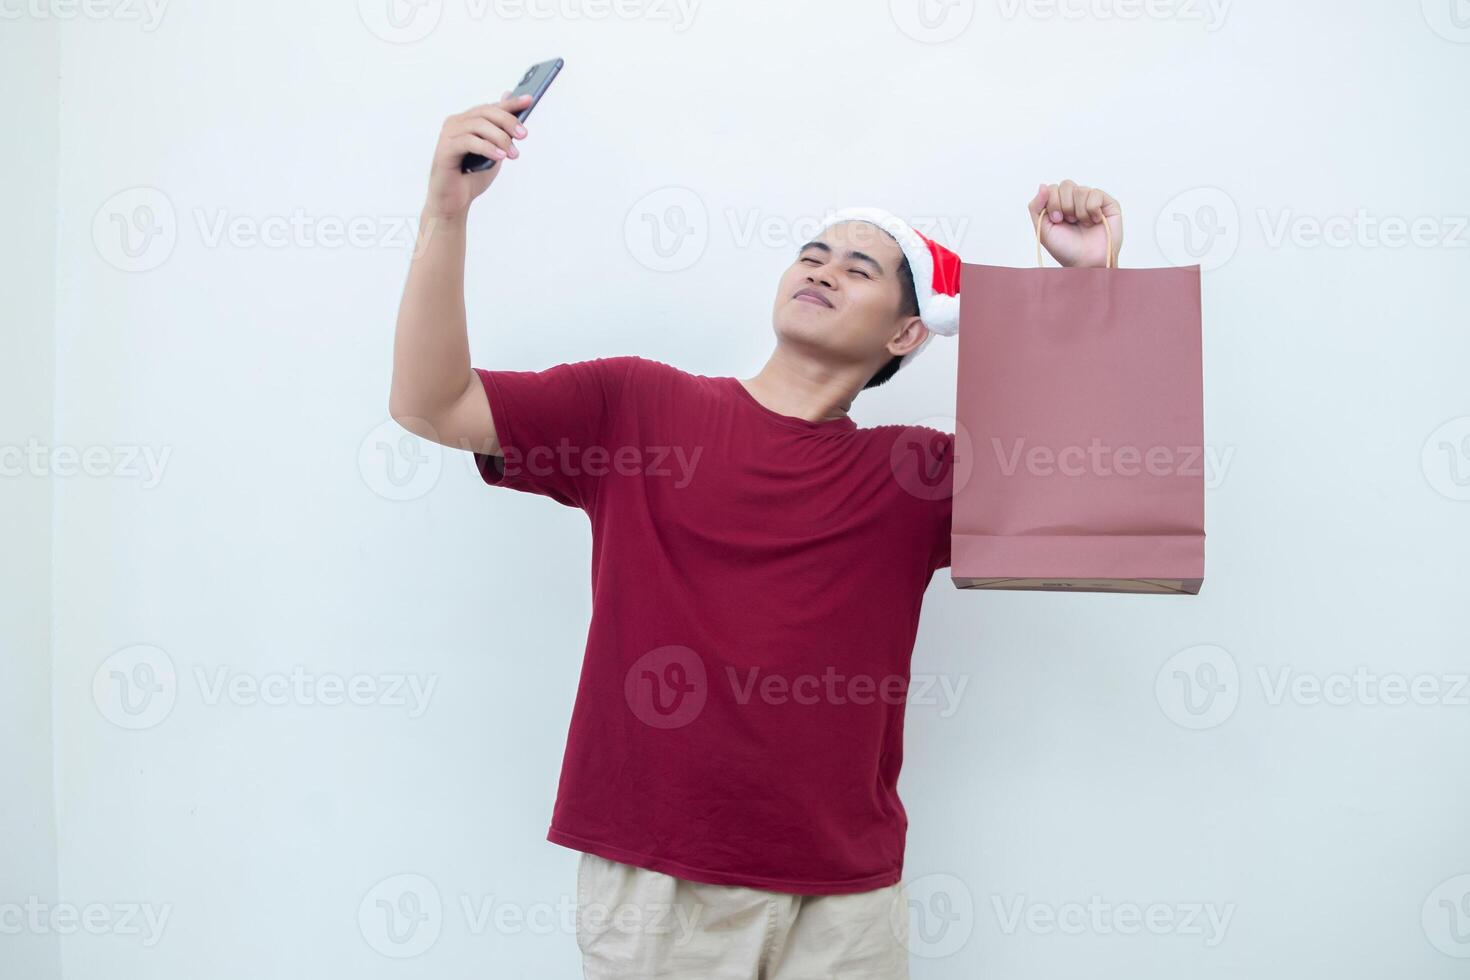 Young Asian man wearing a Santa Claus hat holding a smartphone and a shopping bag with expressions of smile, shock, and surprise, isolated against a white background for visual communication photo